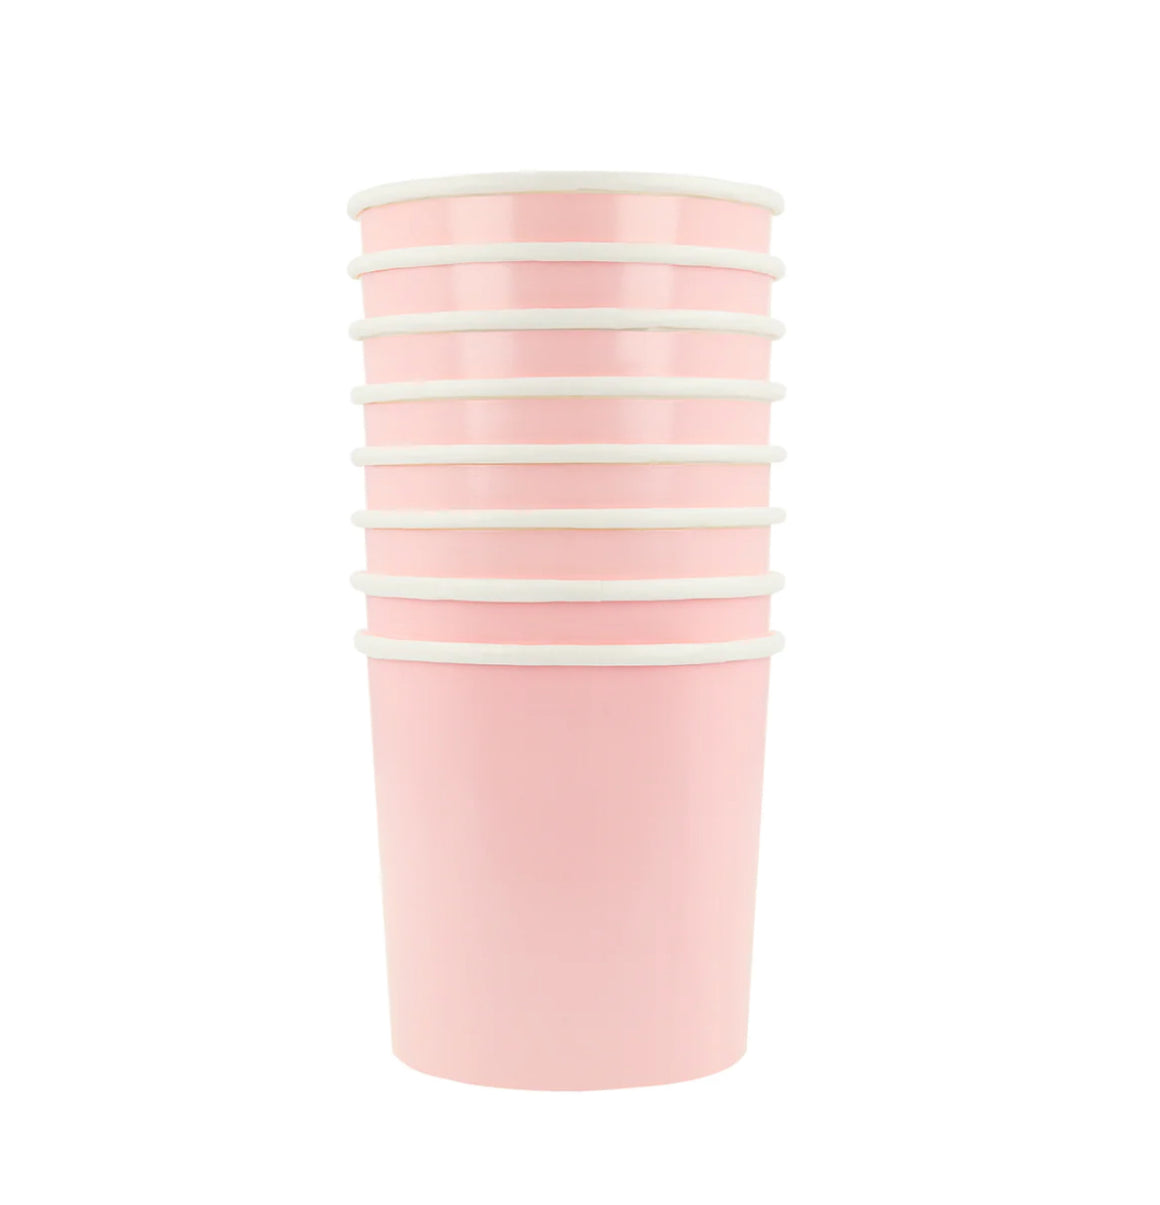 CUPS - PINK COTTON CANDY